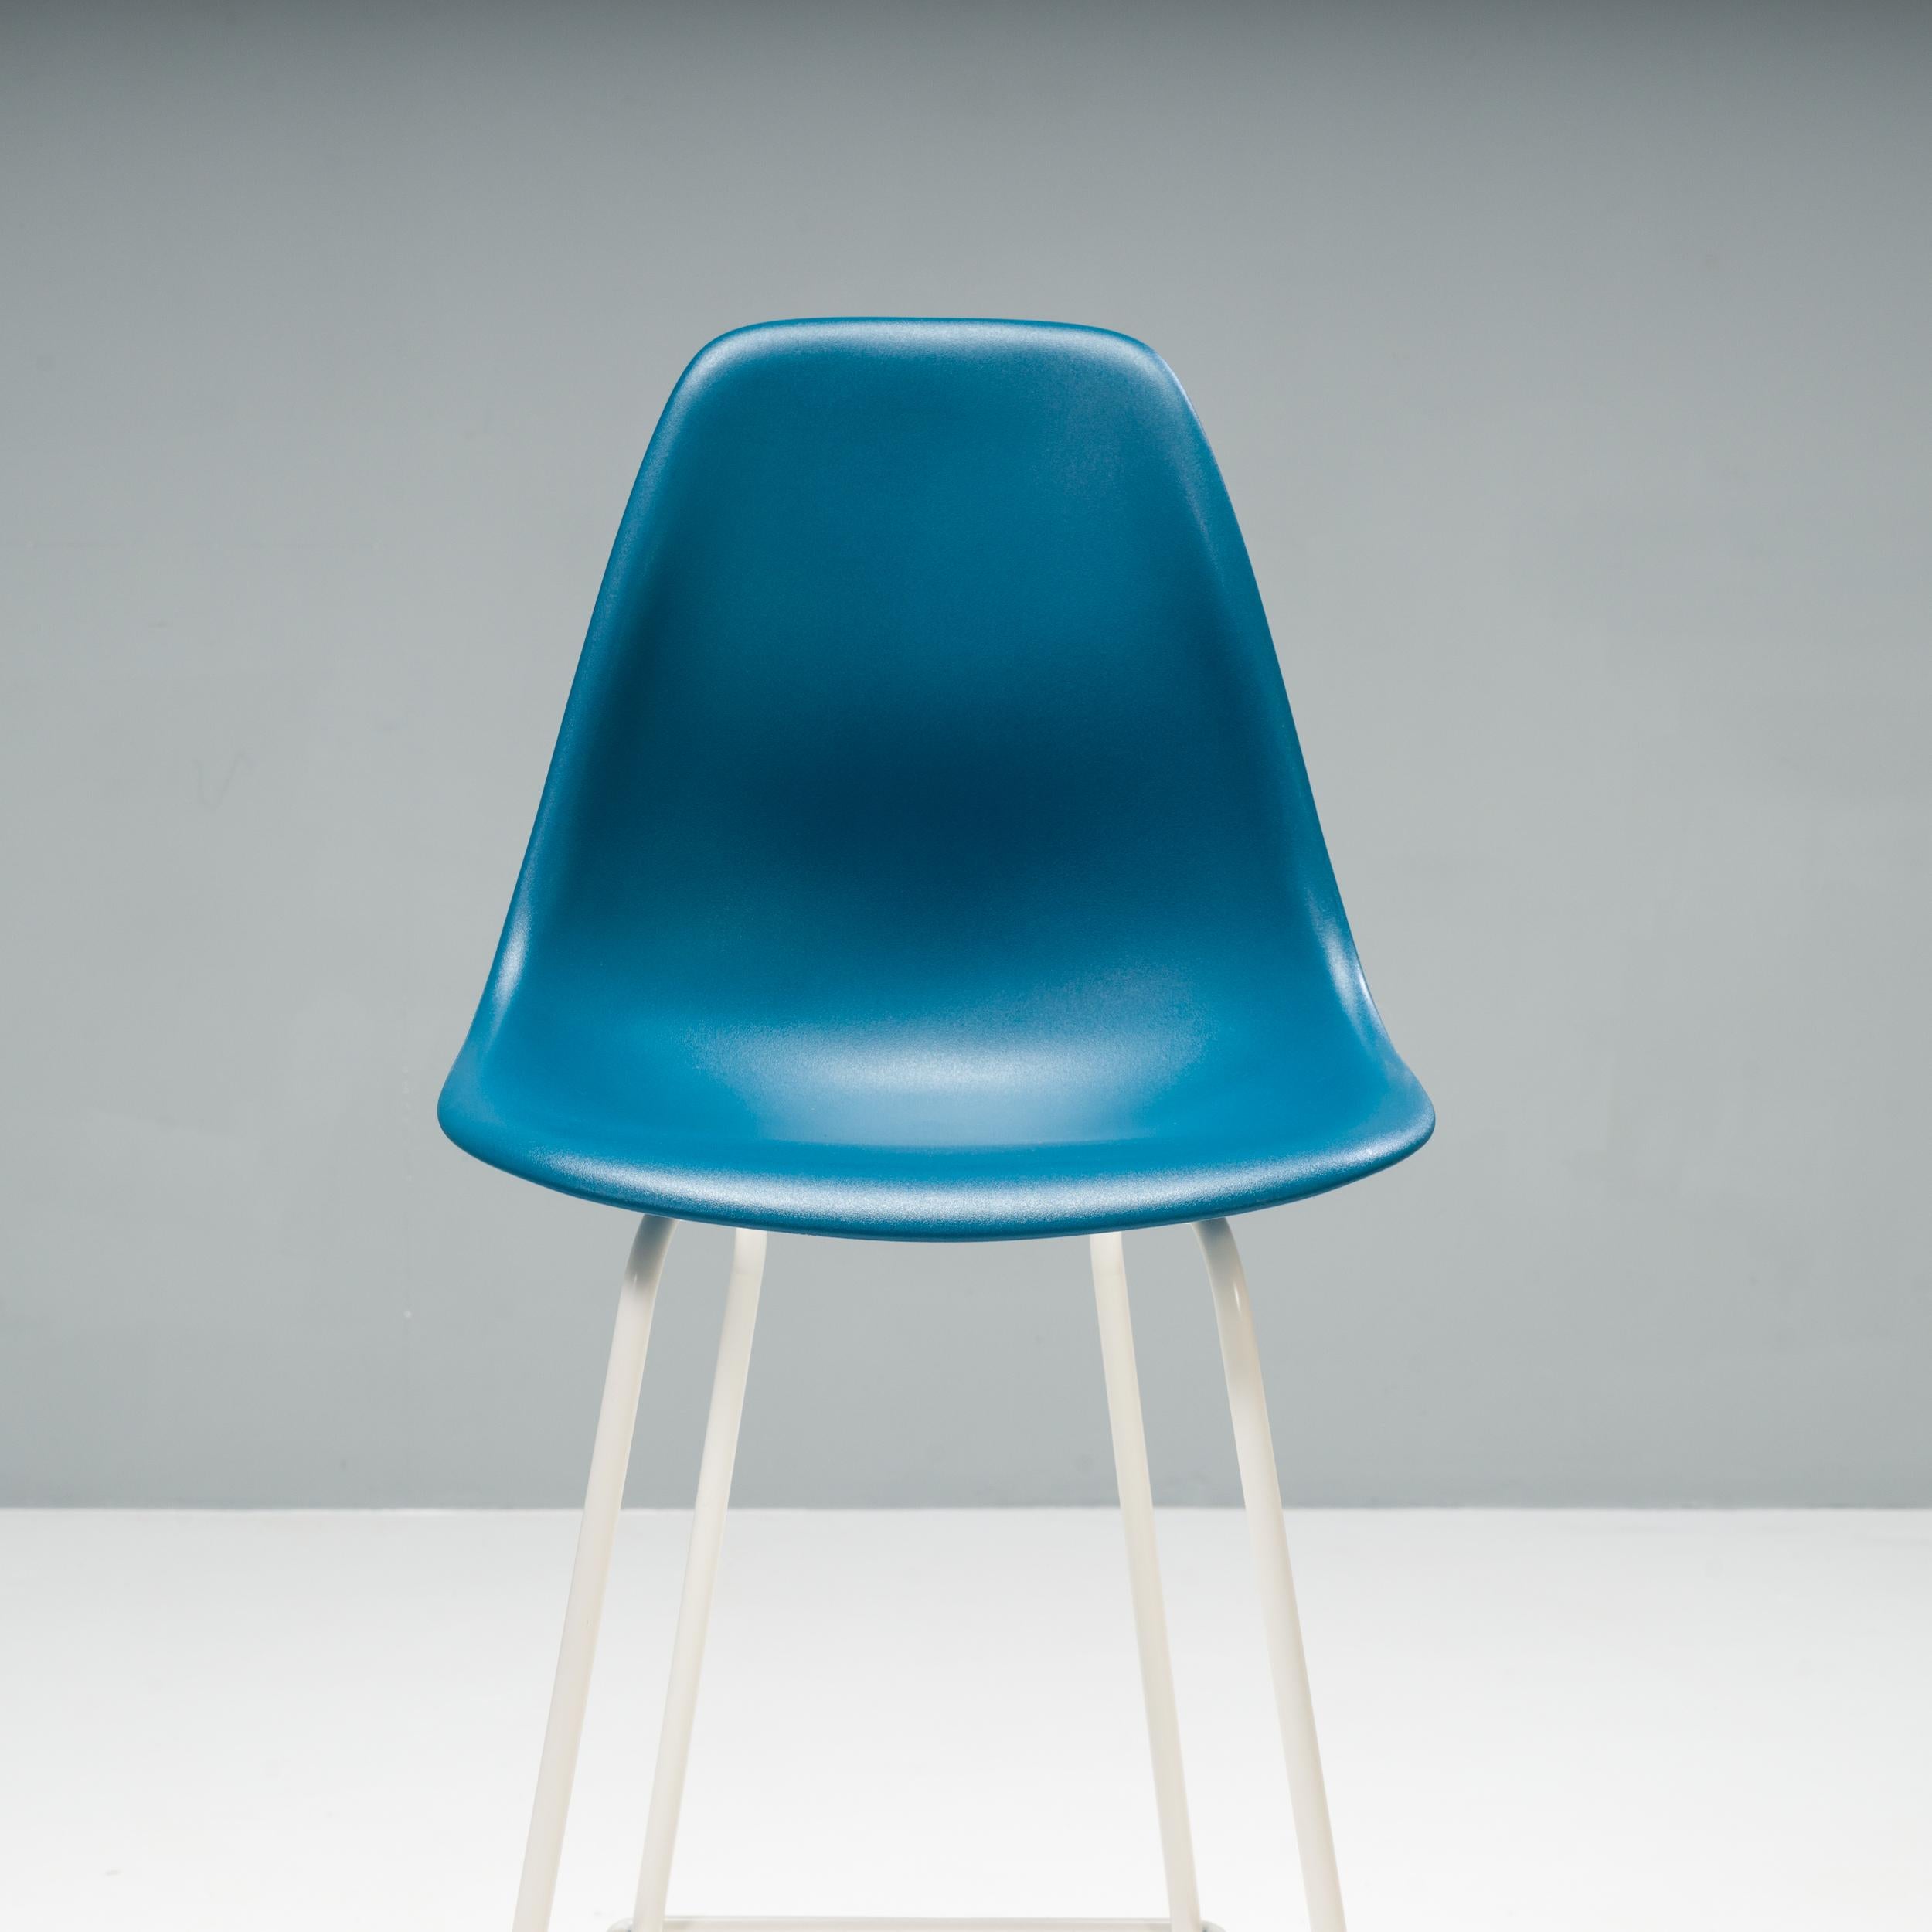 Charles & Ray Eames for Herman Miller Blue Moulded Plastic Stools, Set of 6 1